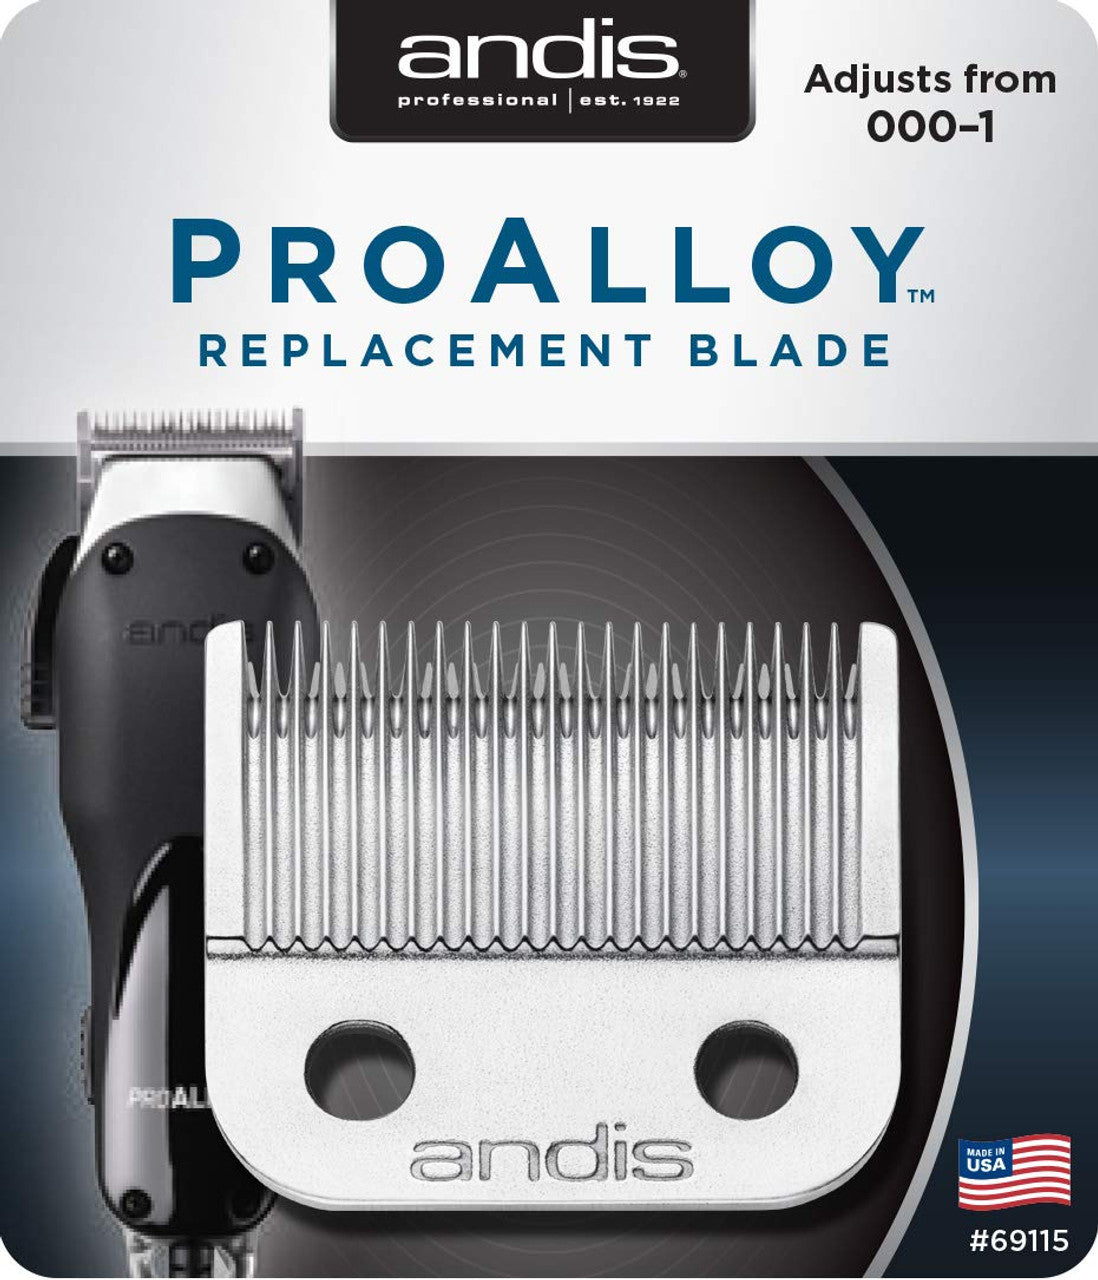 Andis Professional Pro Alloy Clipper Replacement Blade - Model #69115